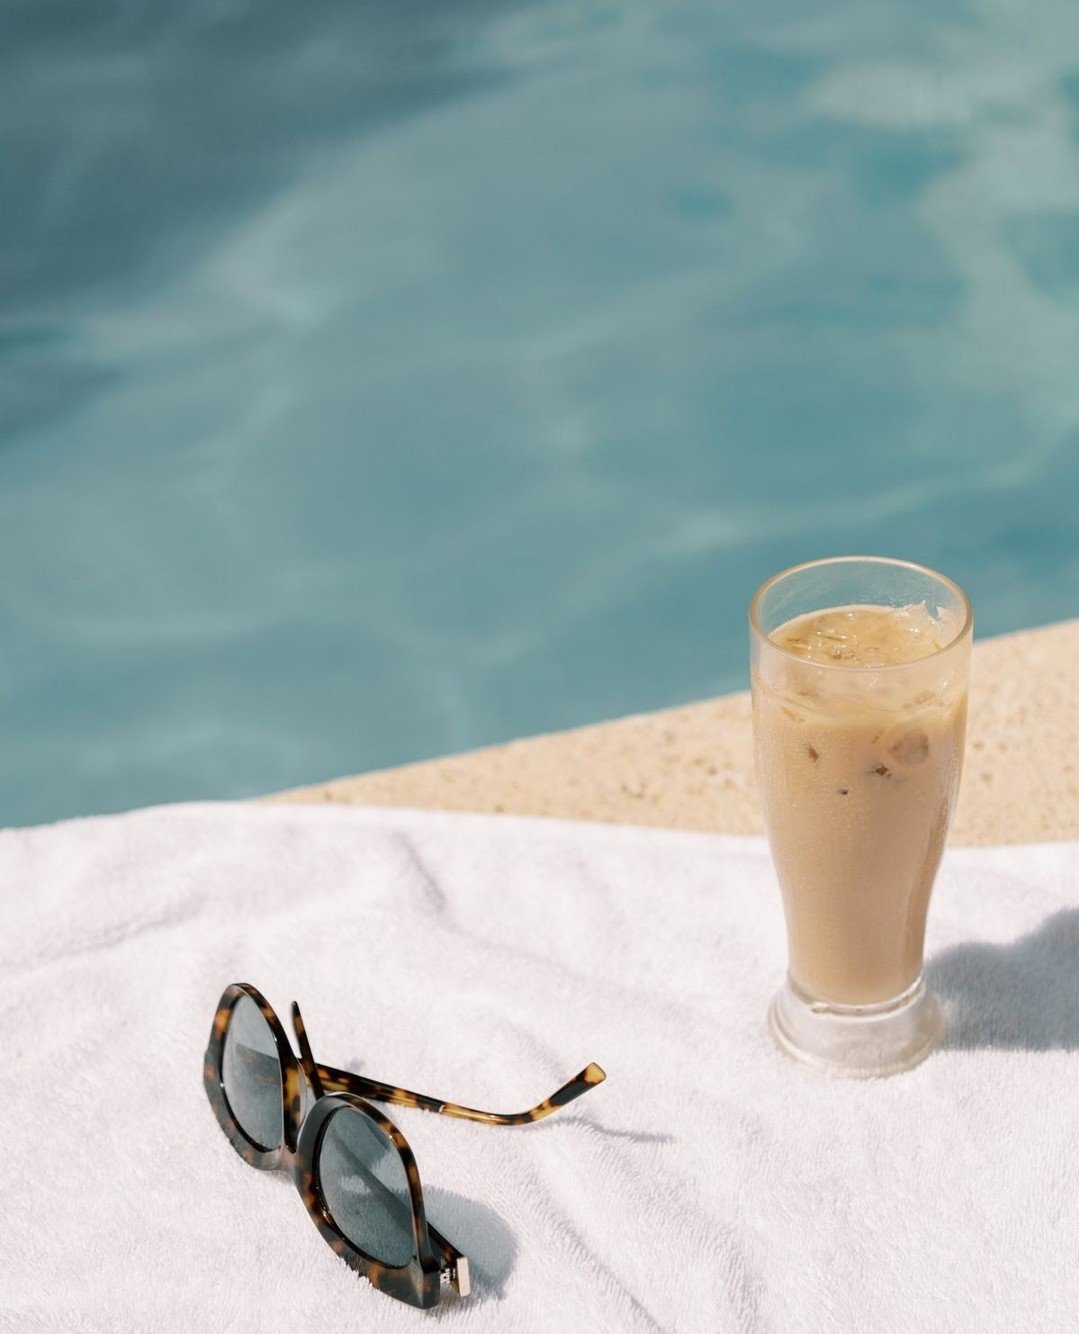 Ready for the unofficial official start of summer! This is the time to soak in actual summer before holiday gift guide season begins in July. Don't say we didn't warn you! ⁠
⁠
Happy holiday weekend! 🌿⁠
⁠
.⁠
.⁠
.⁠
.⁠
.⁠
.⁠
.⁠
.⁠
#pr #publicrelations 